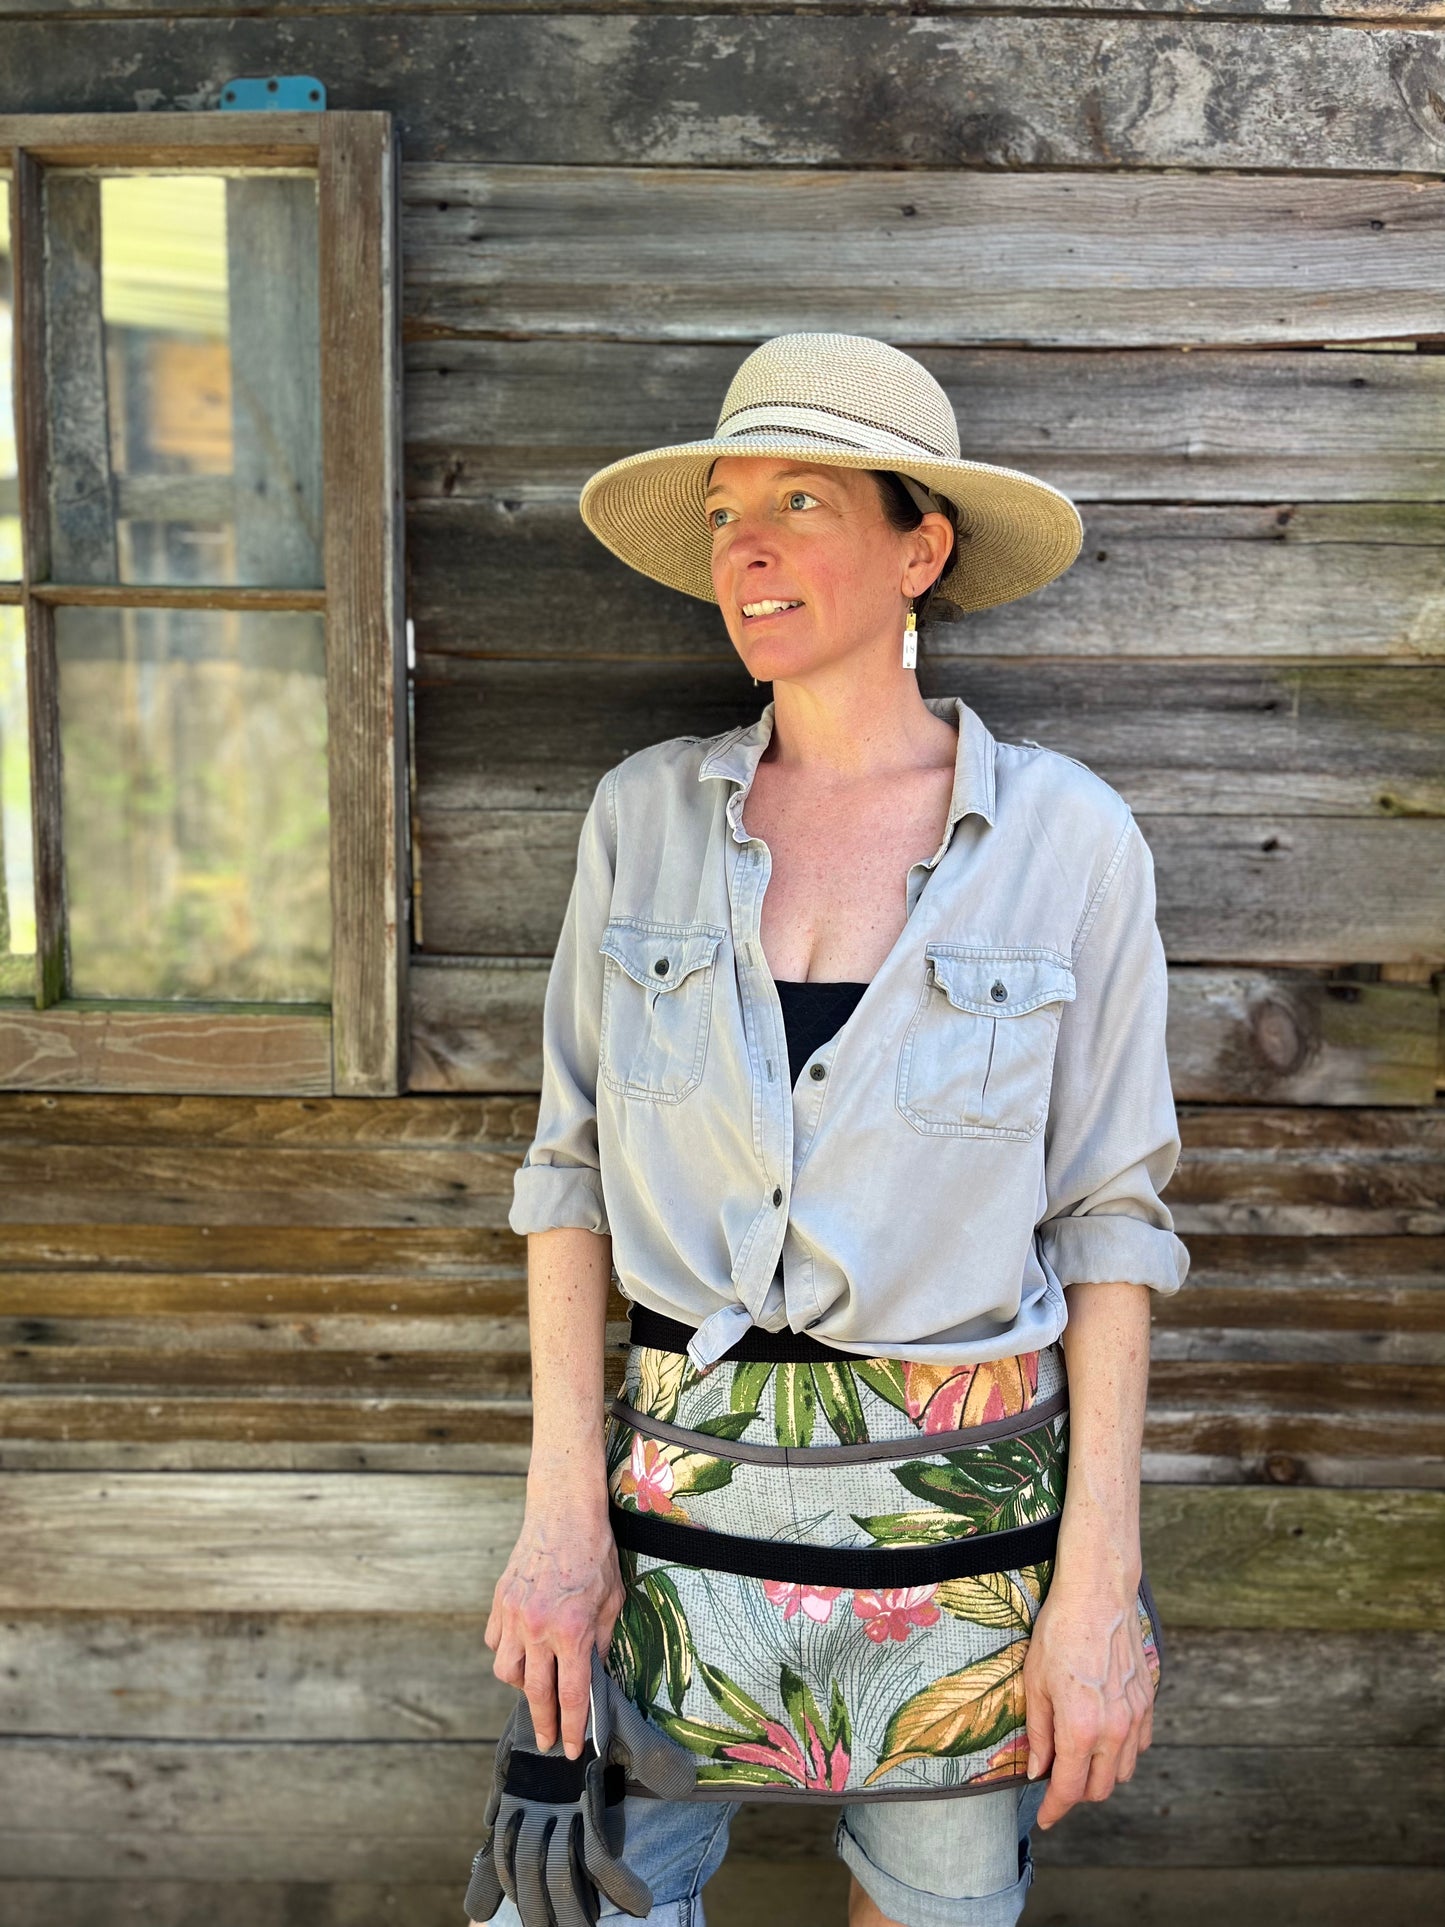 A woman in a printed half apron, sun hat and button down shirt stands in front of a barn, in the shade, and looks off into the distance, as though admiring her work in the garden.